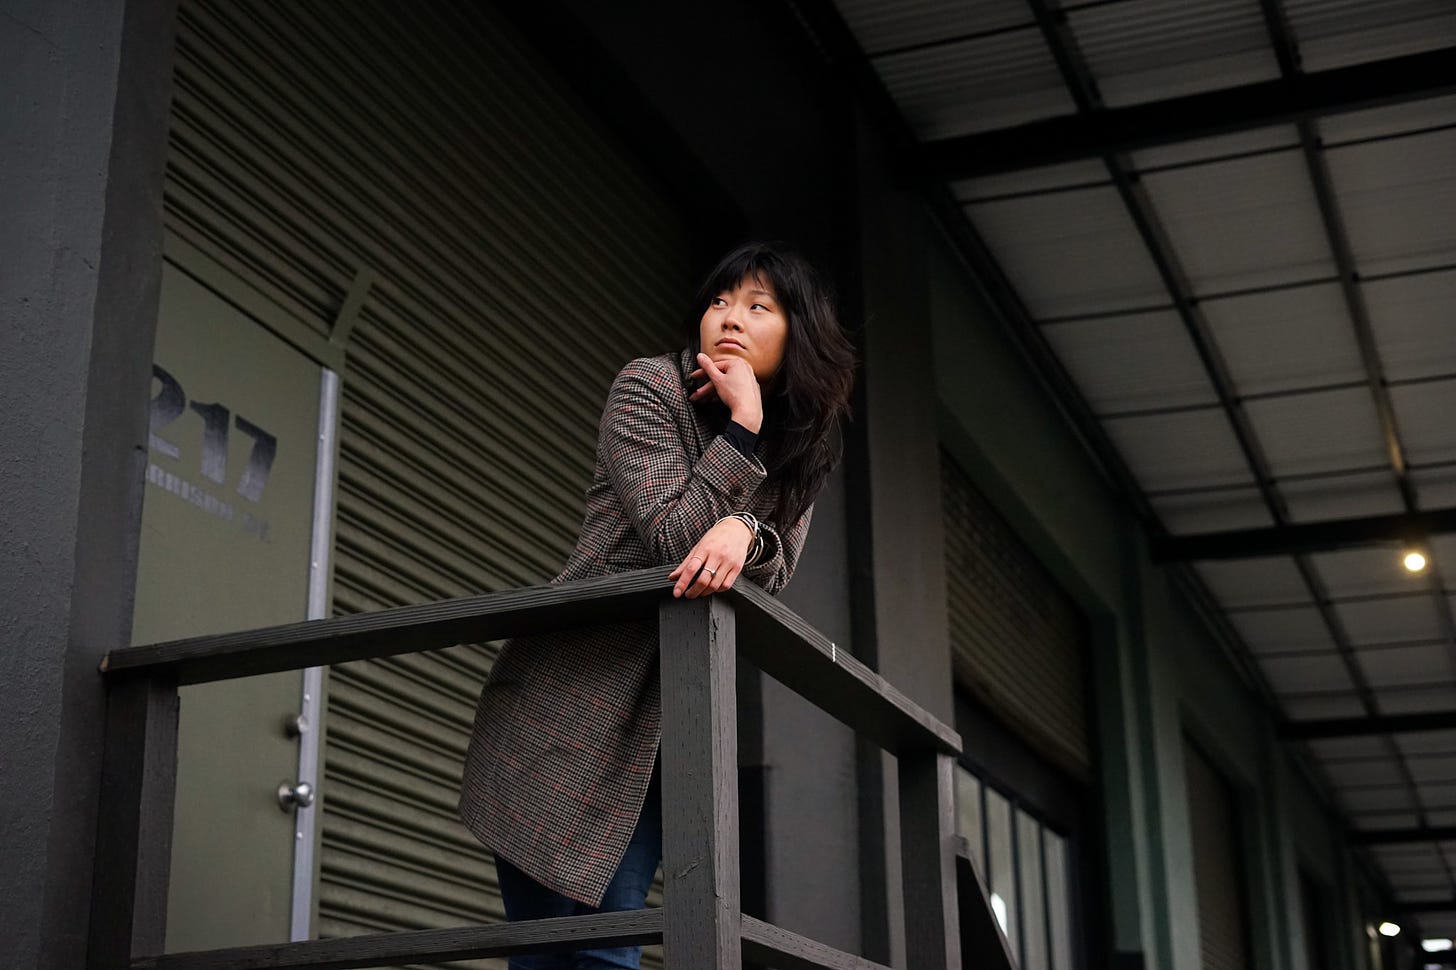 An asian female leaning over a guardrail outside a warehouse, chin resting on her hand gazing out into the distance